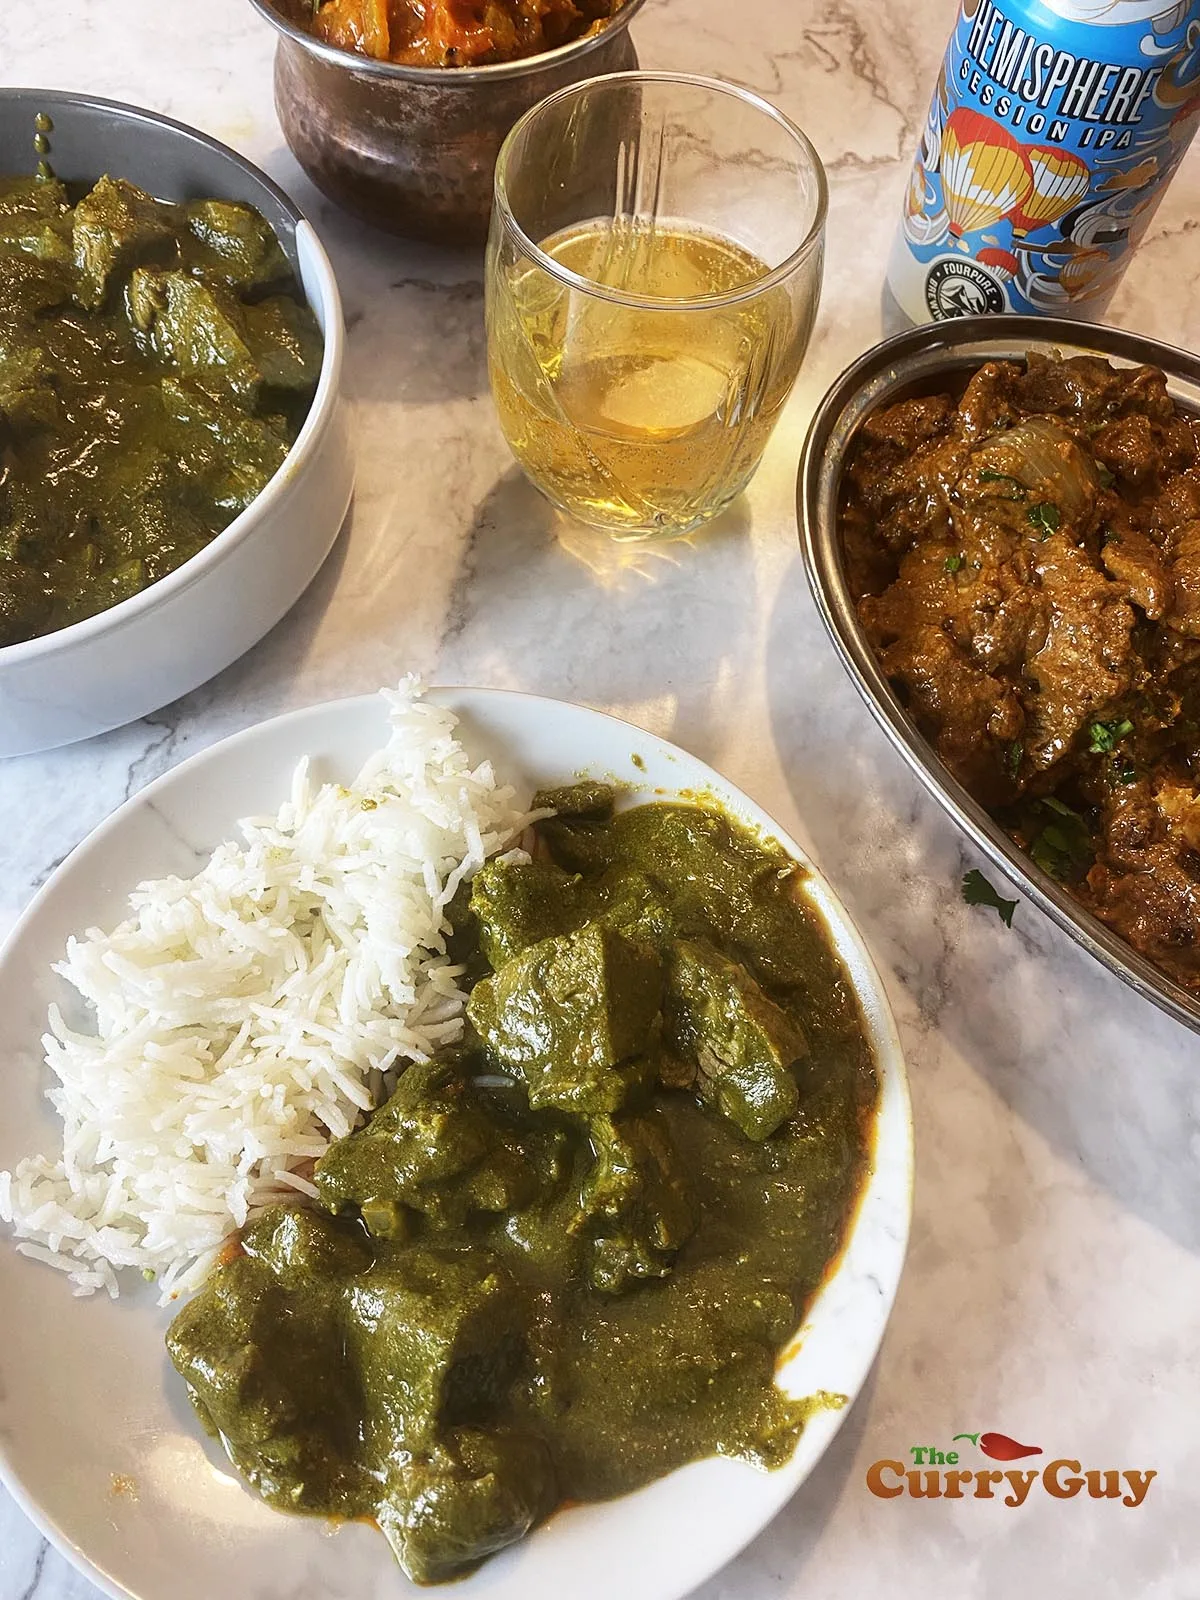 Finished lamb saag curry with other curries.